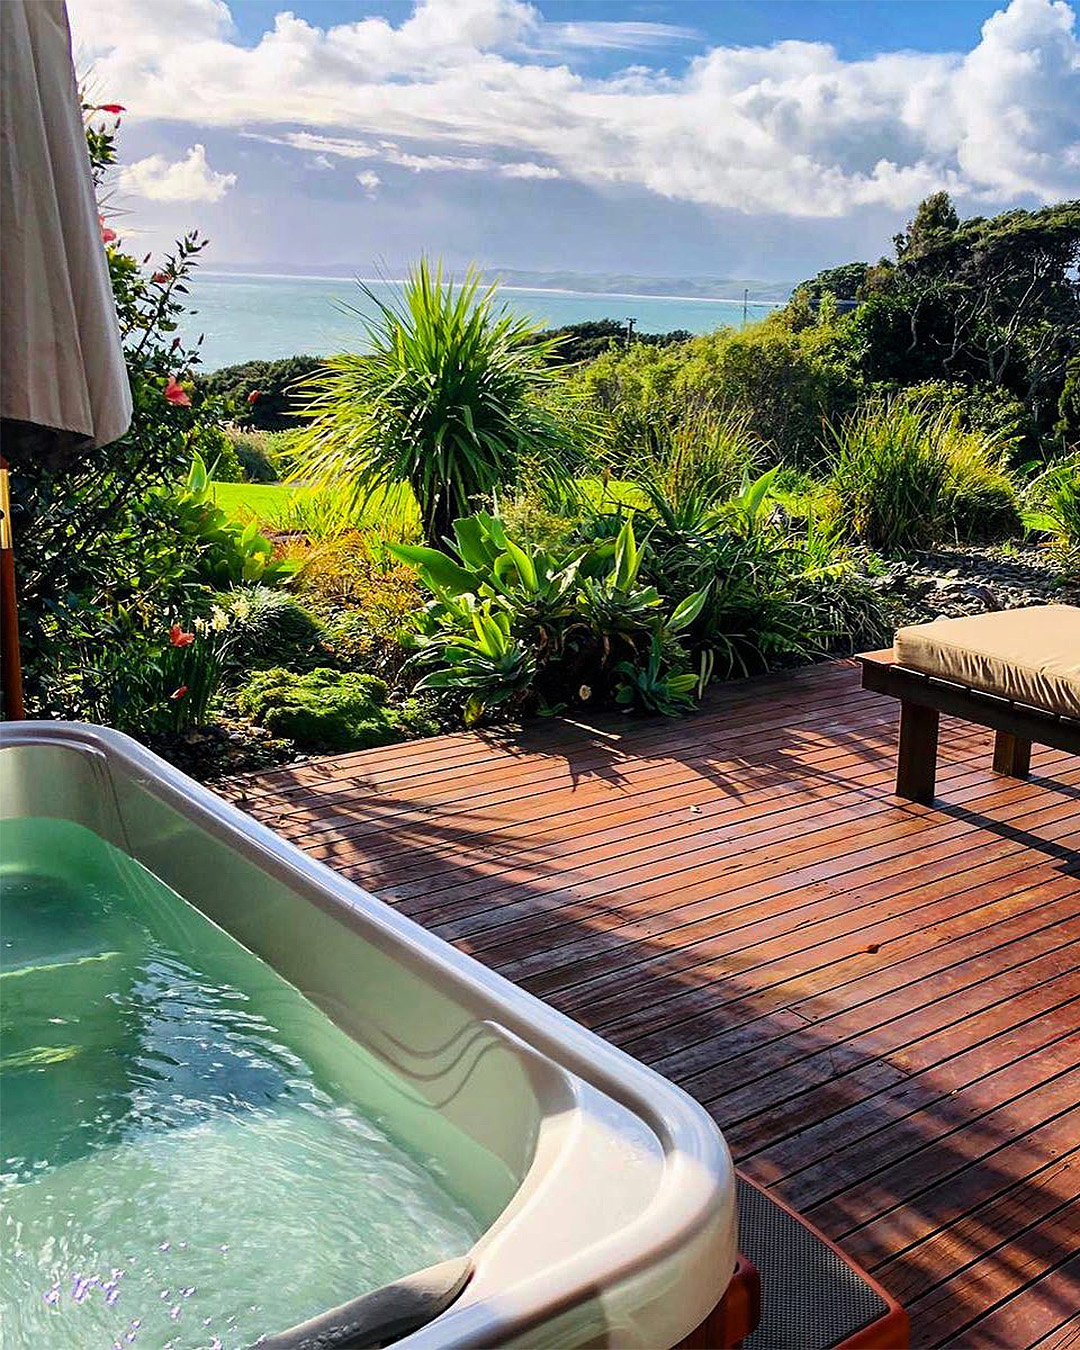 An outdoor hot tub looks out onto a lovely view.